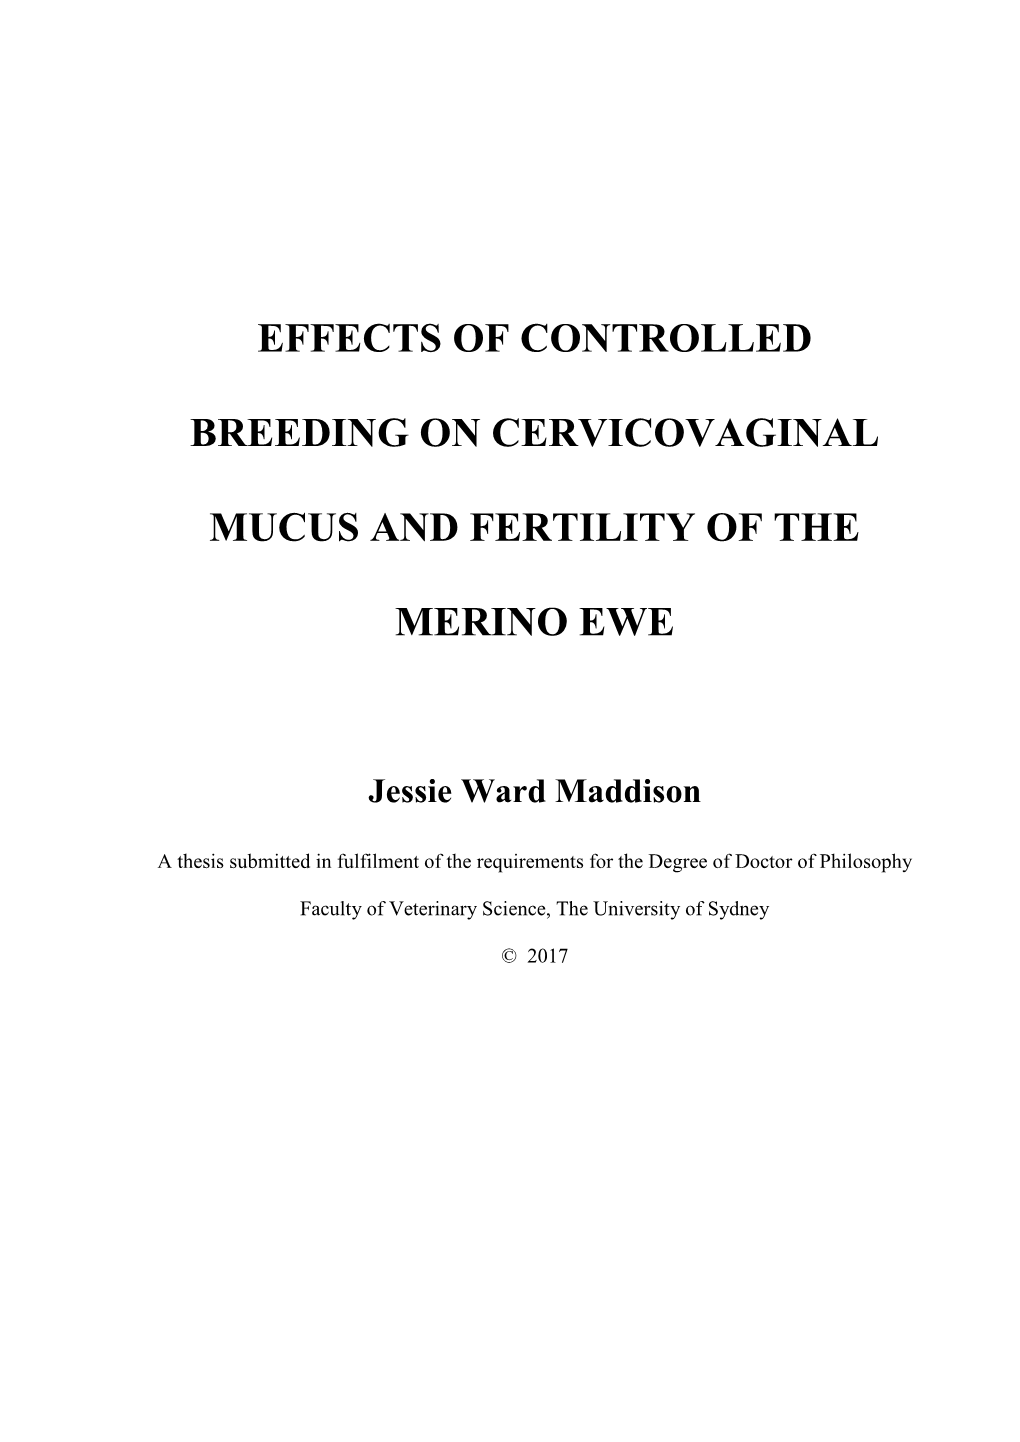 Effects of Controlled Breeding on Cervicovaginal